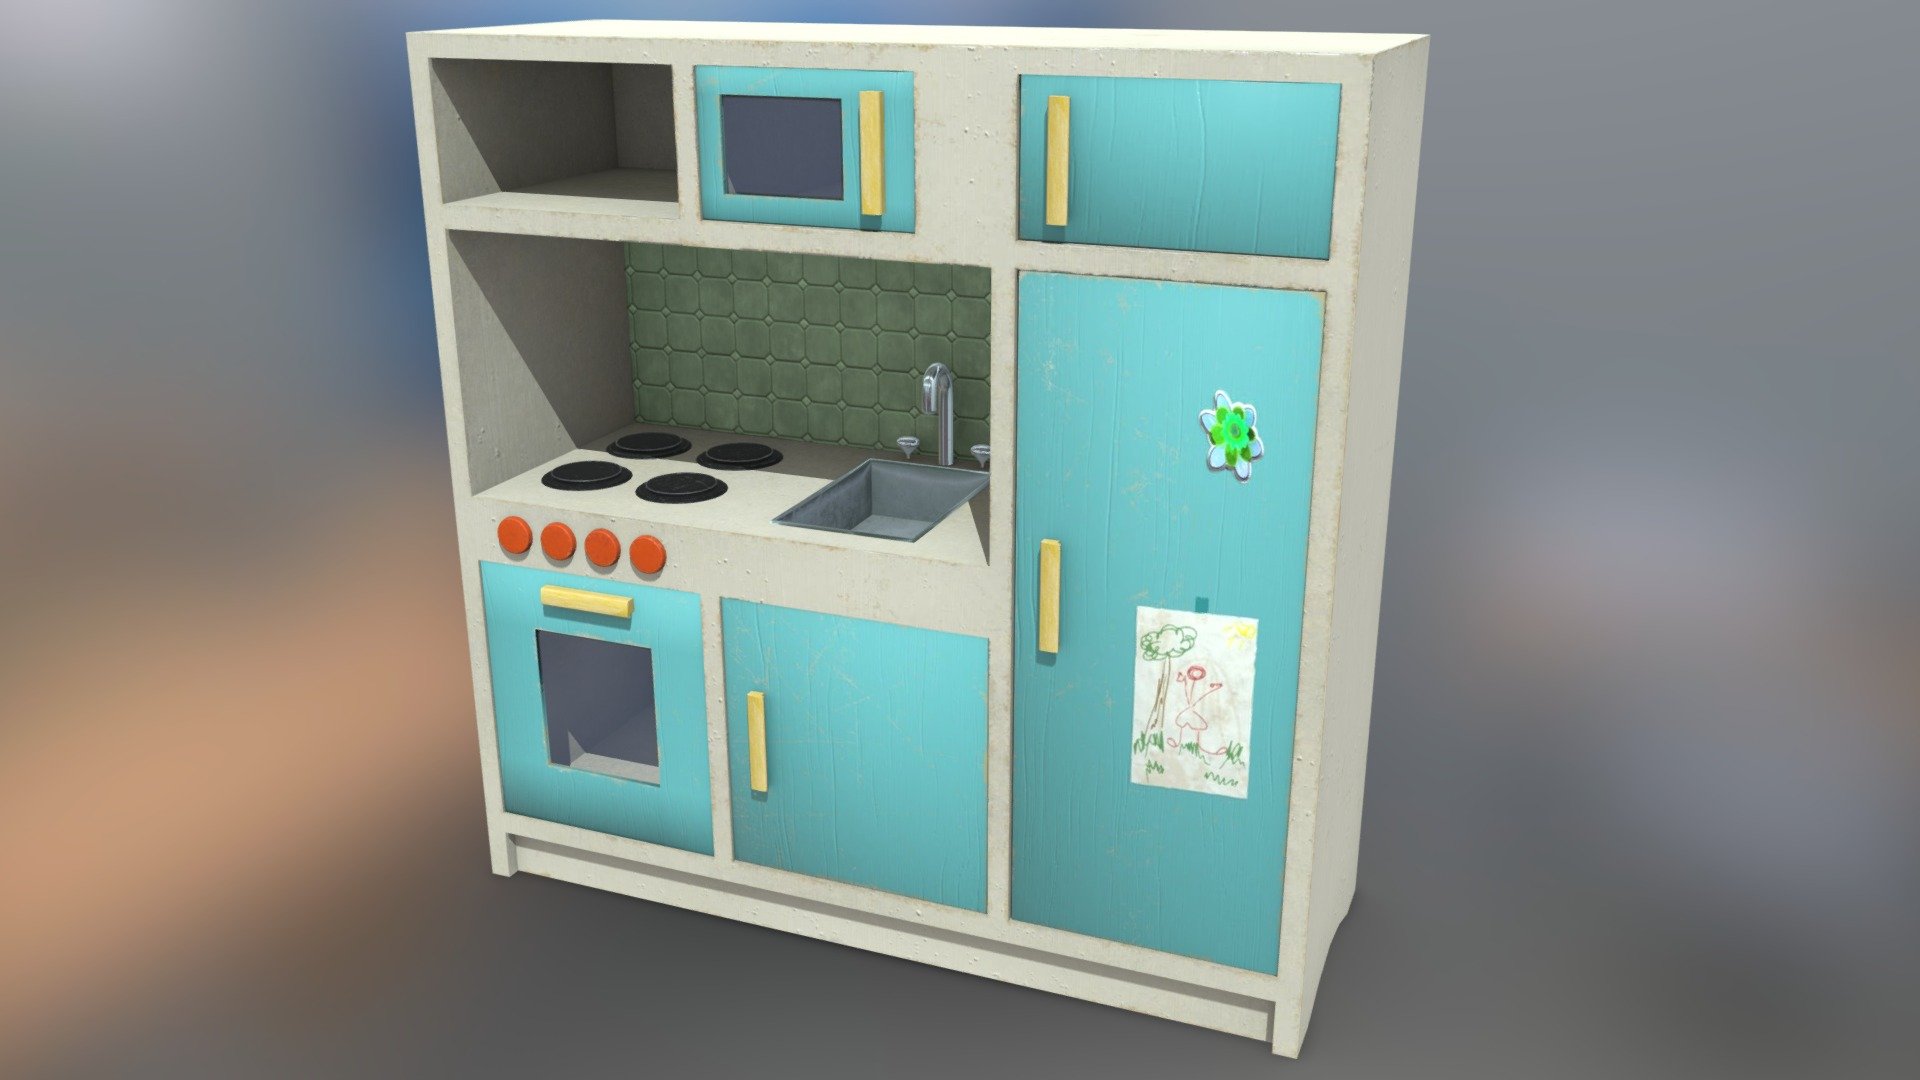 This Toy-Kitchen was loved by many children and is (even after many years) in a quite goode condition.

Used wooden Toy-Kitchen with a fridge, a oven, a sink, a stove and a lot of storage space for Toys.



LowPoly
4K Textures (4096x4096)

.fbx-Object
.jpg-Textures



made with:
3DsMax
SubstancePainter
Photoshop - Used Children's Kitchen - Buy Royalty Free 3D model by MDSDesign 3d model